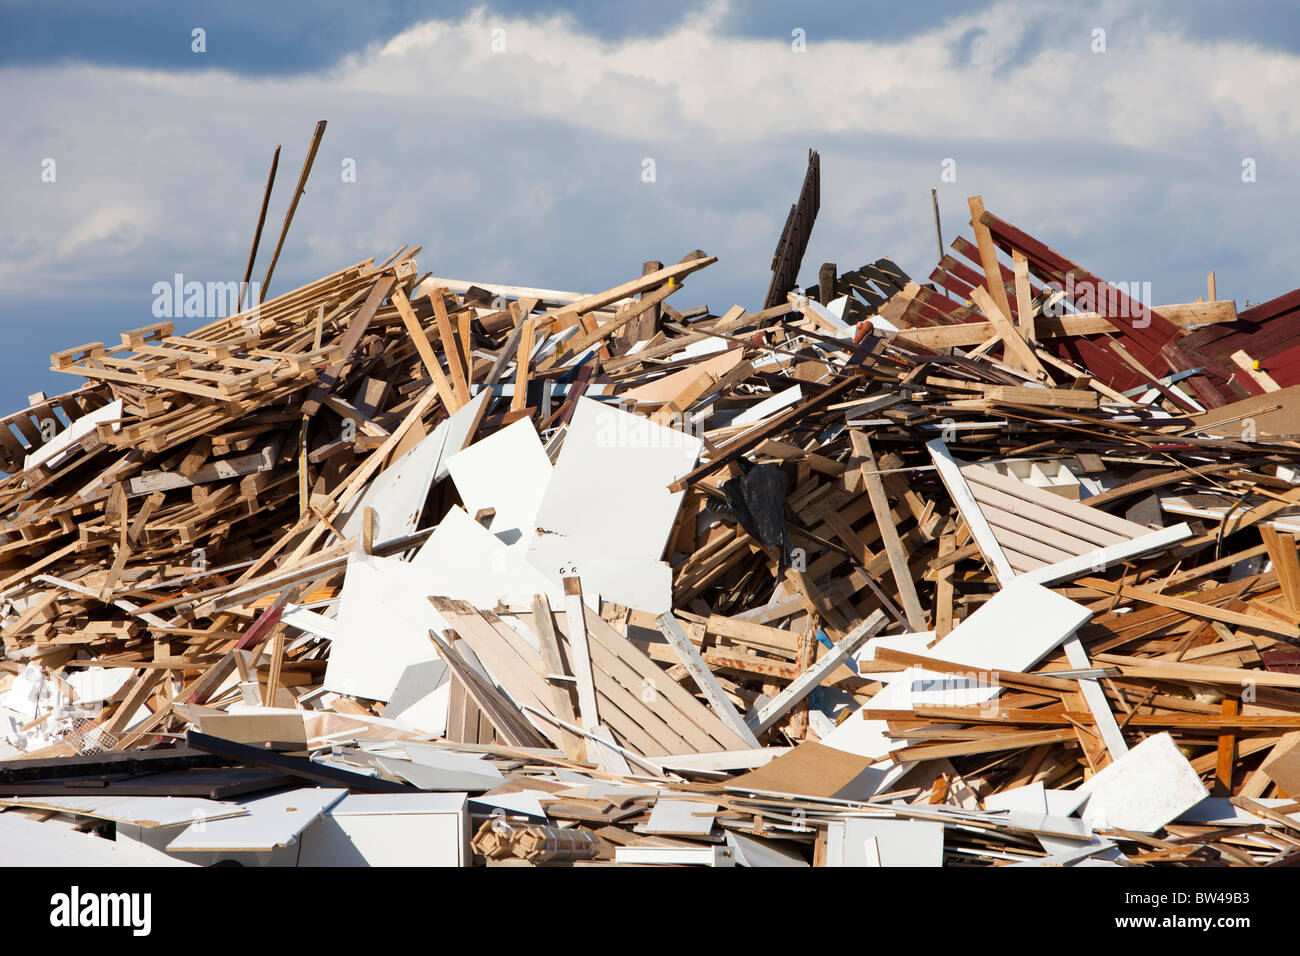 Old used construction / demolition wooden materials piled up and waiting for recycling , Finland Stock Photo